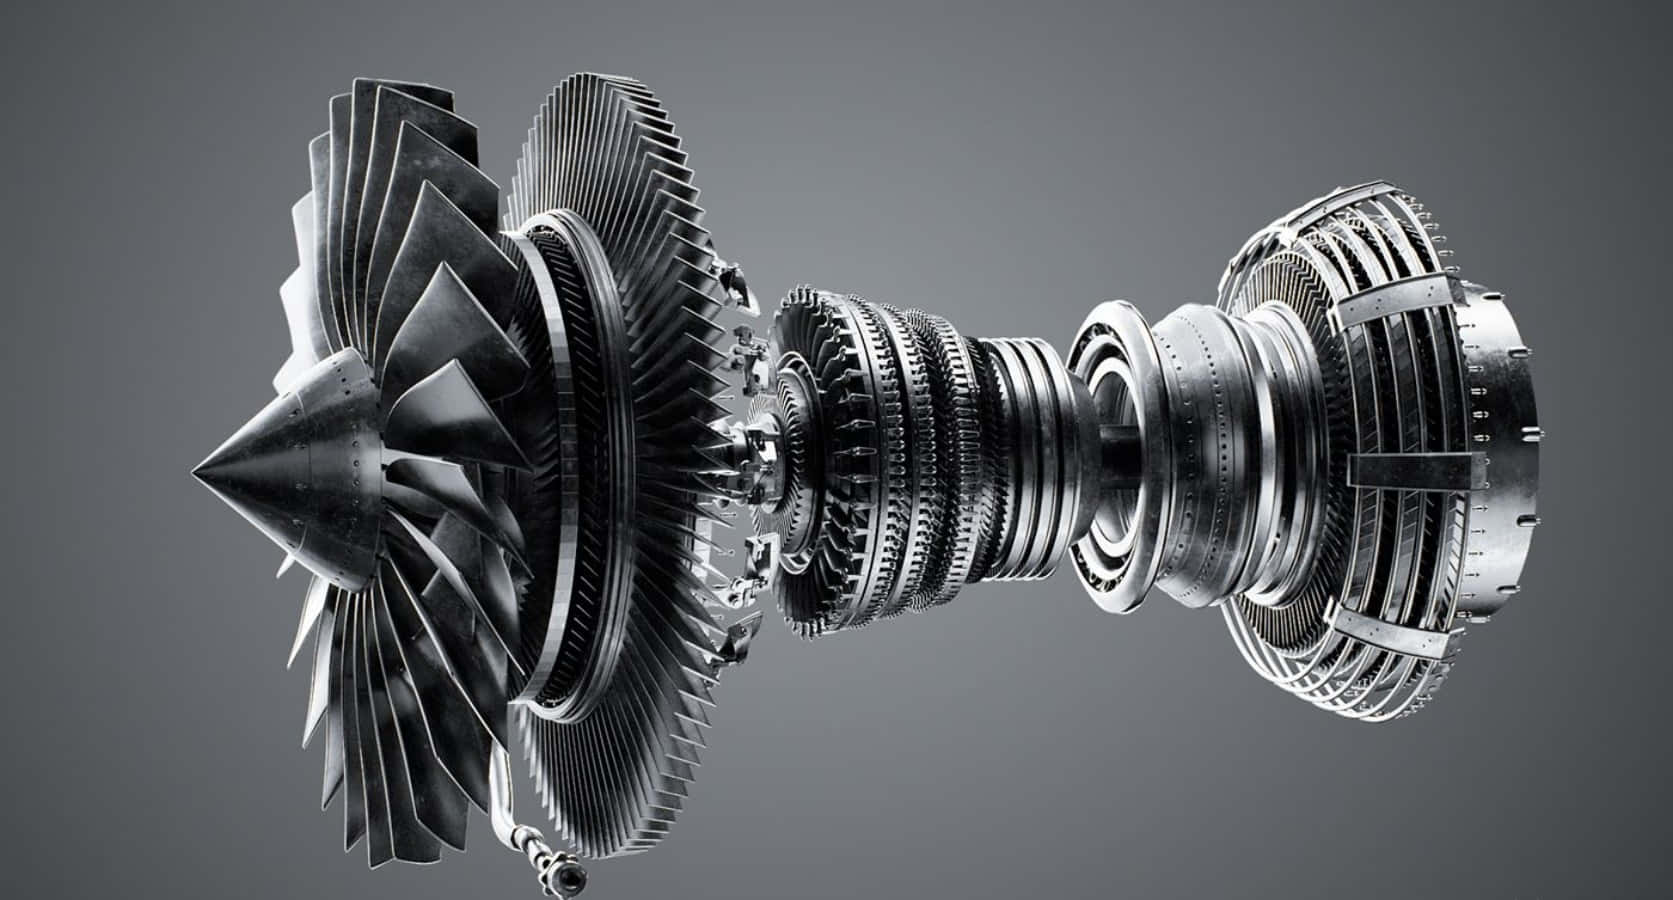 Powerful Jet Engine in Operation Wallpaper